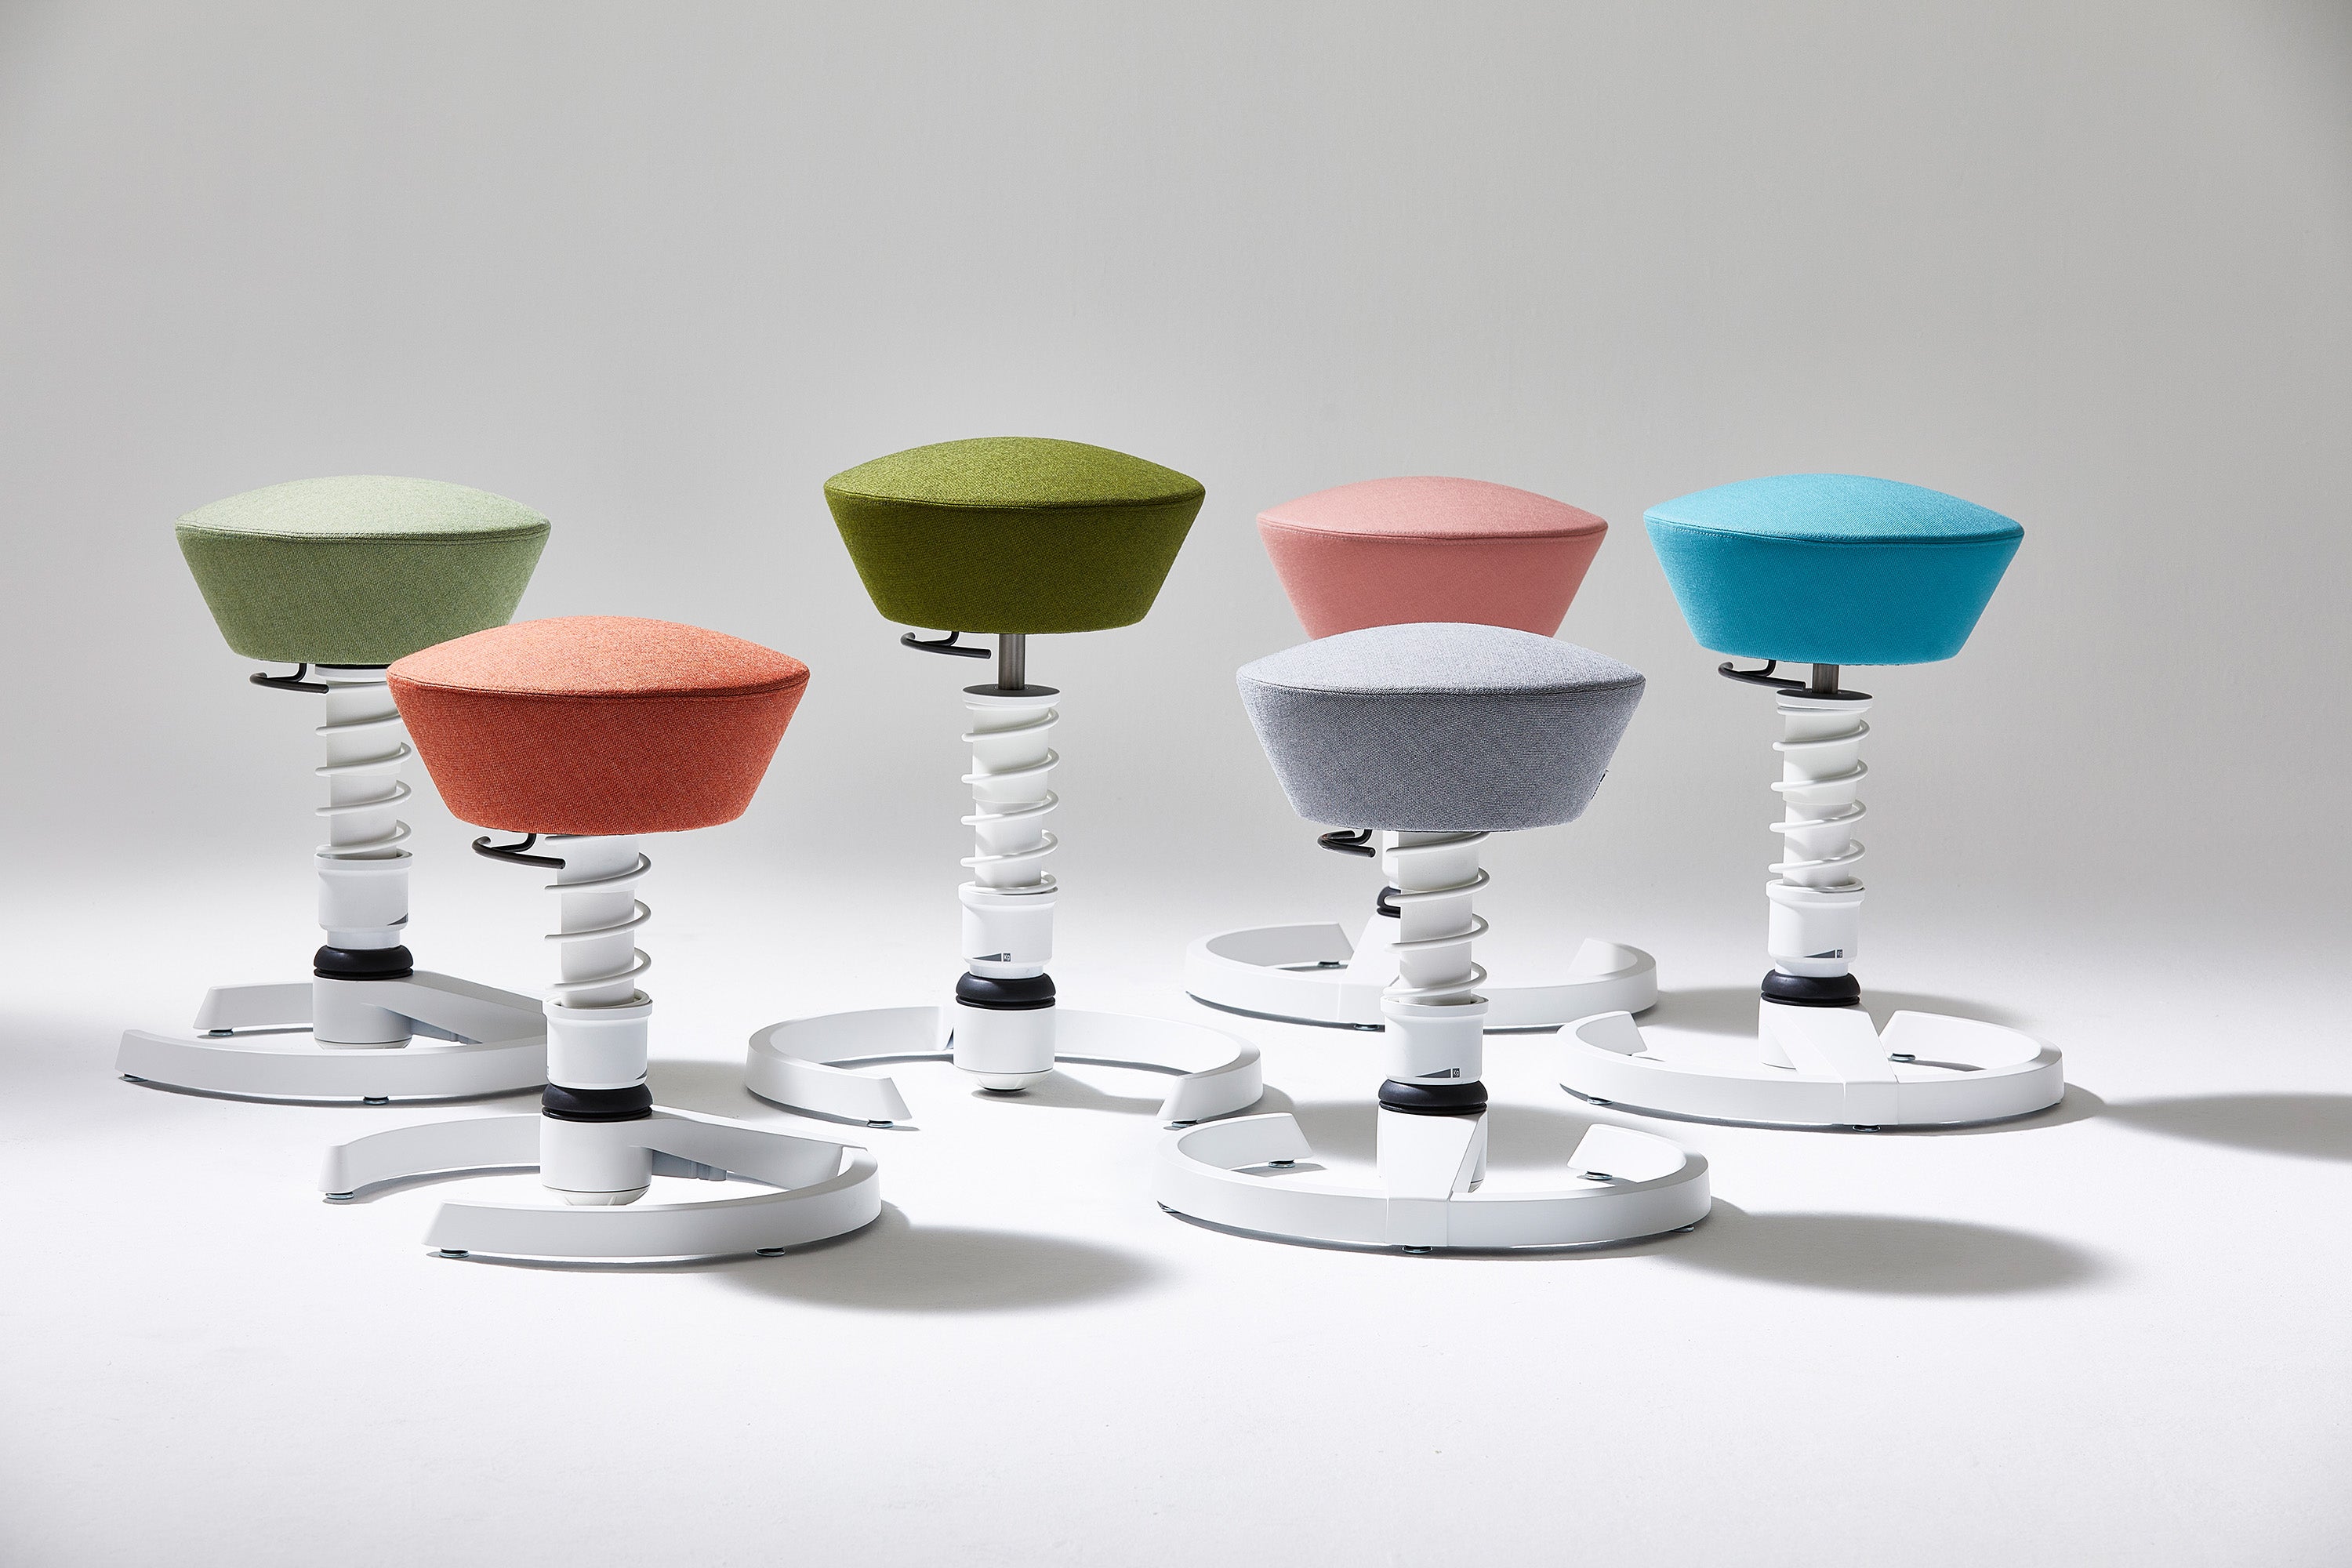 The Aeris Swopper work stool can be customized, its design is distinctive